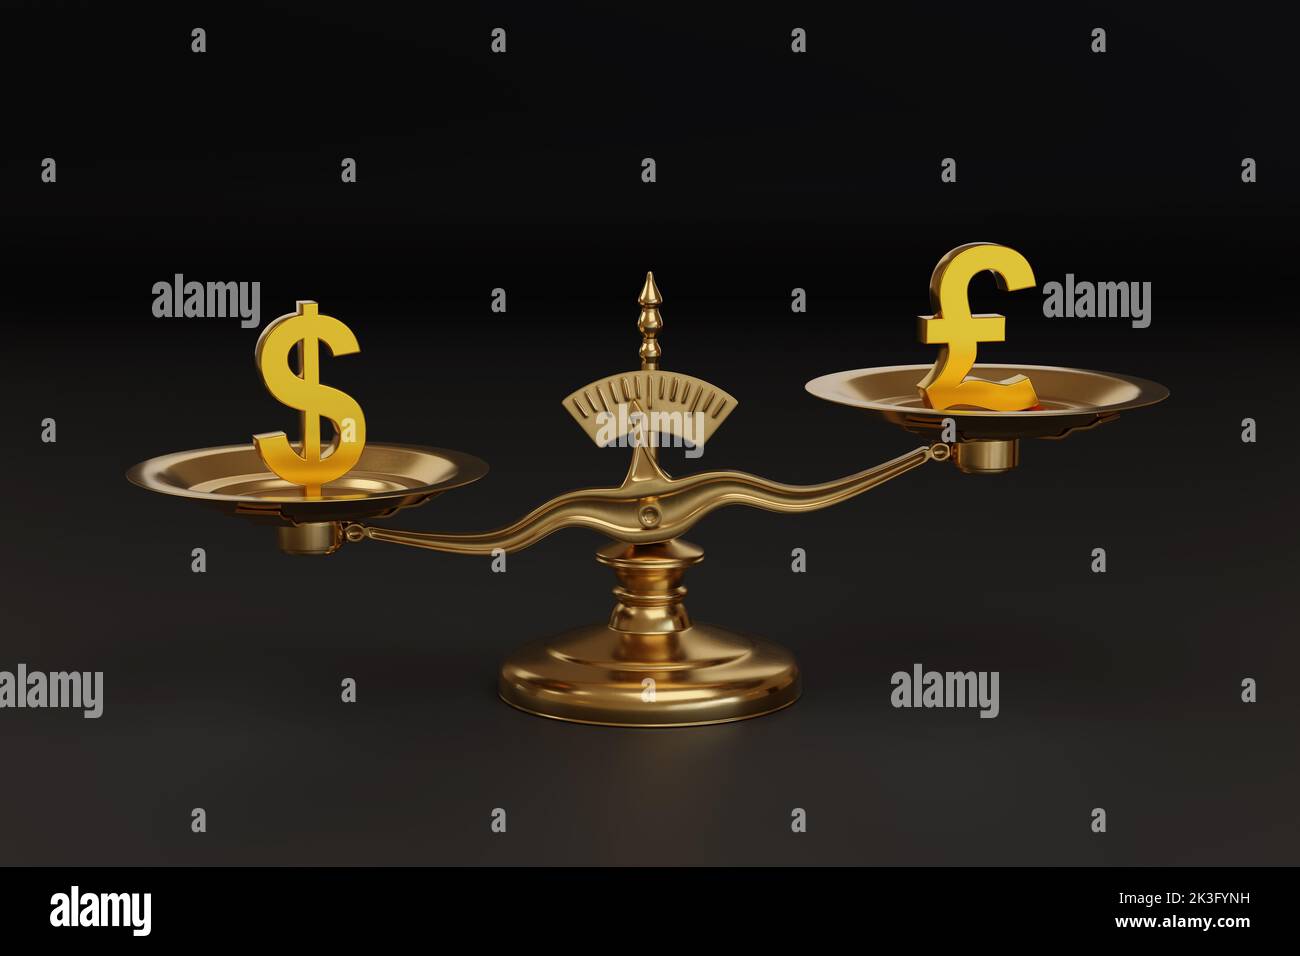 Balance scales with dollar and pound signs on their plates. 3d illustration. Stock Photo